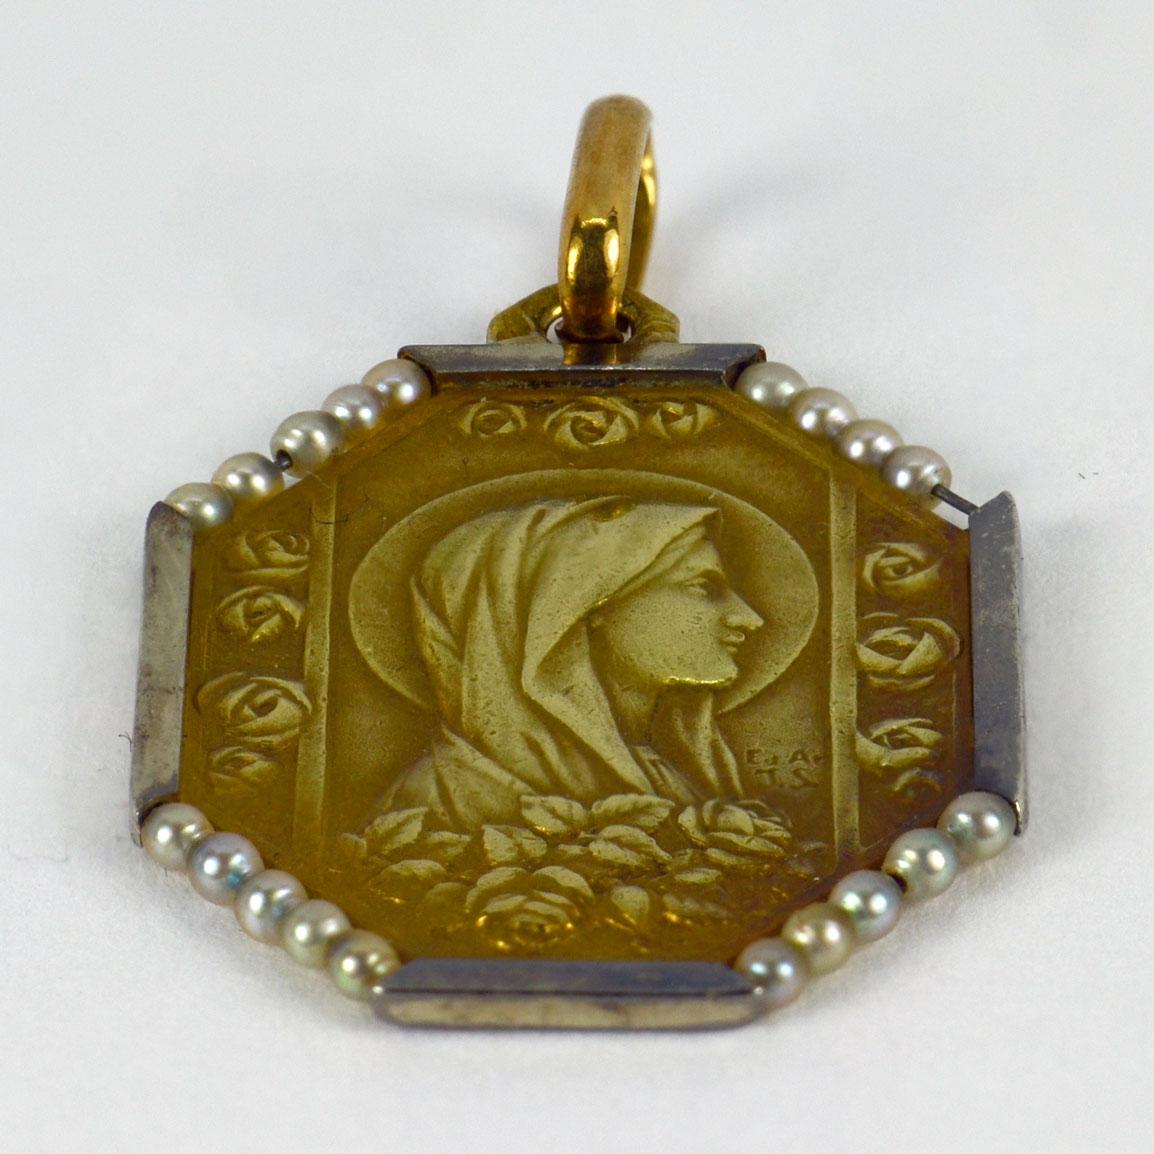 An 18 karat (18K) yellow gold pendant designed as a medal depicting the Virgin Mary with a surround of 19 natural seed pearls. Engraved to the reverse with a monogram of FC and the date ‘31 Mai 1934’.  Signed E.A. and J.S., stamped with the eagle’s